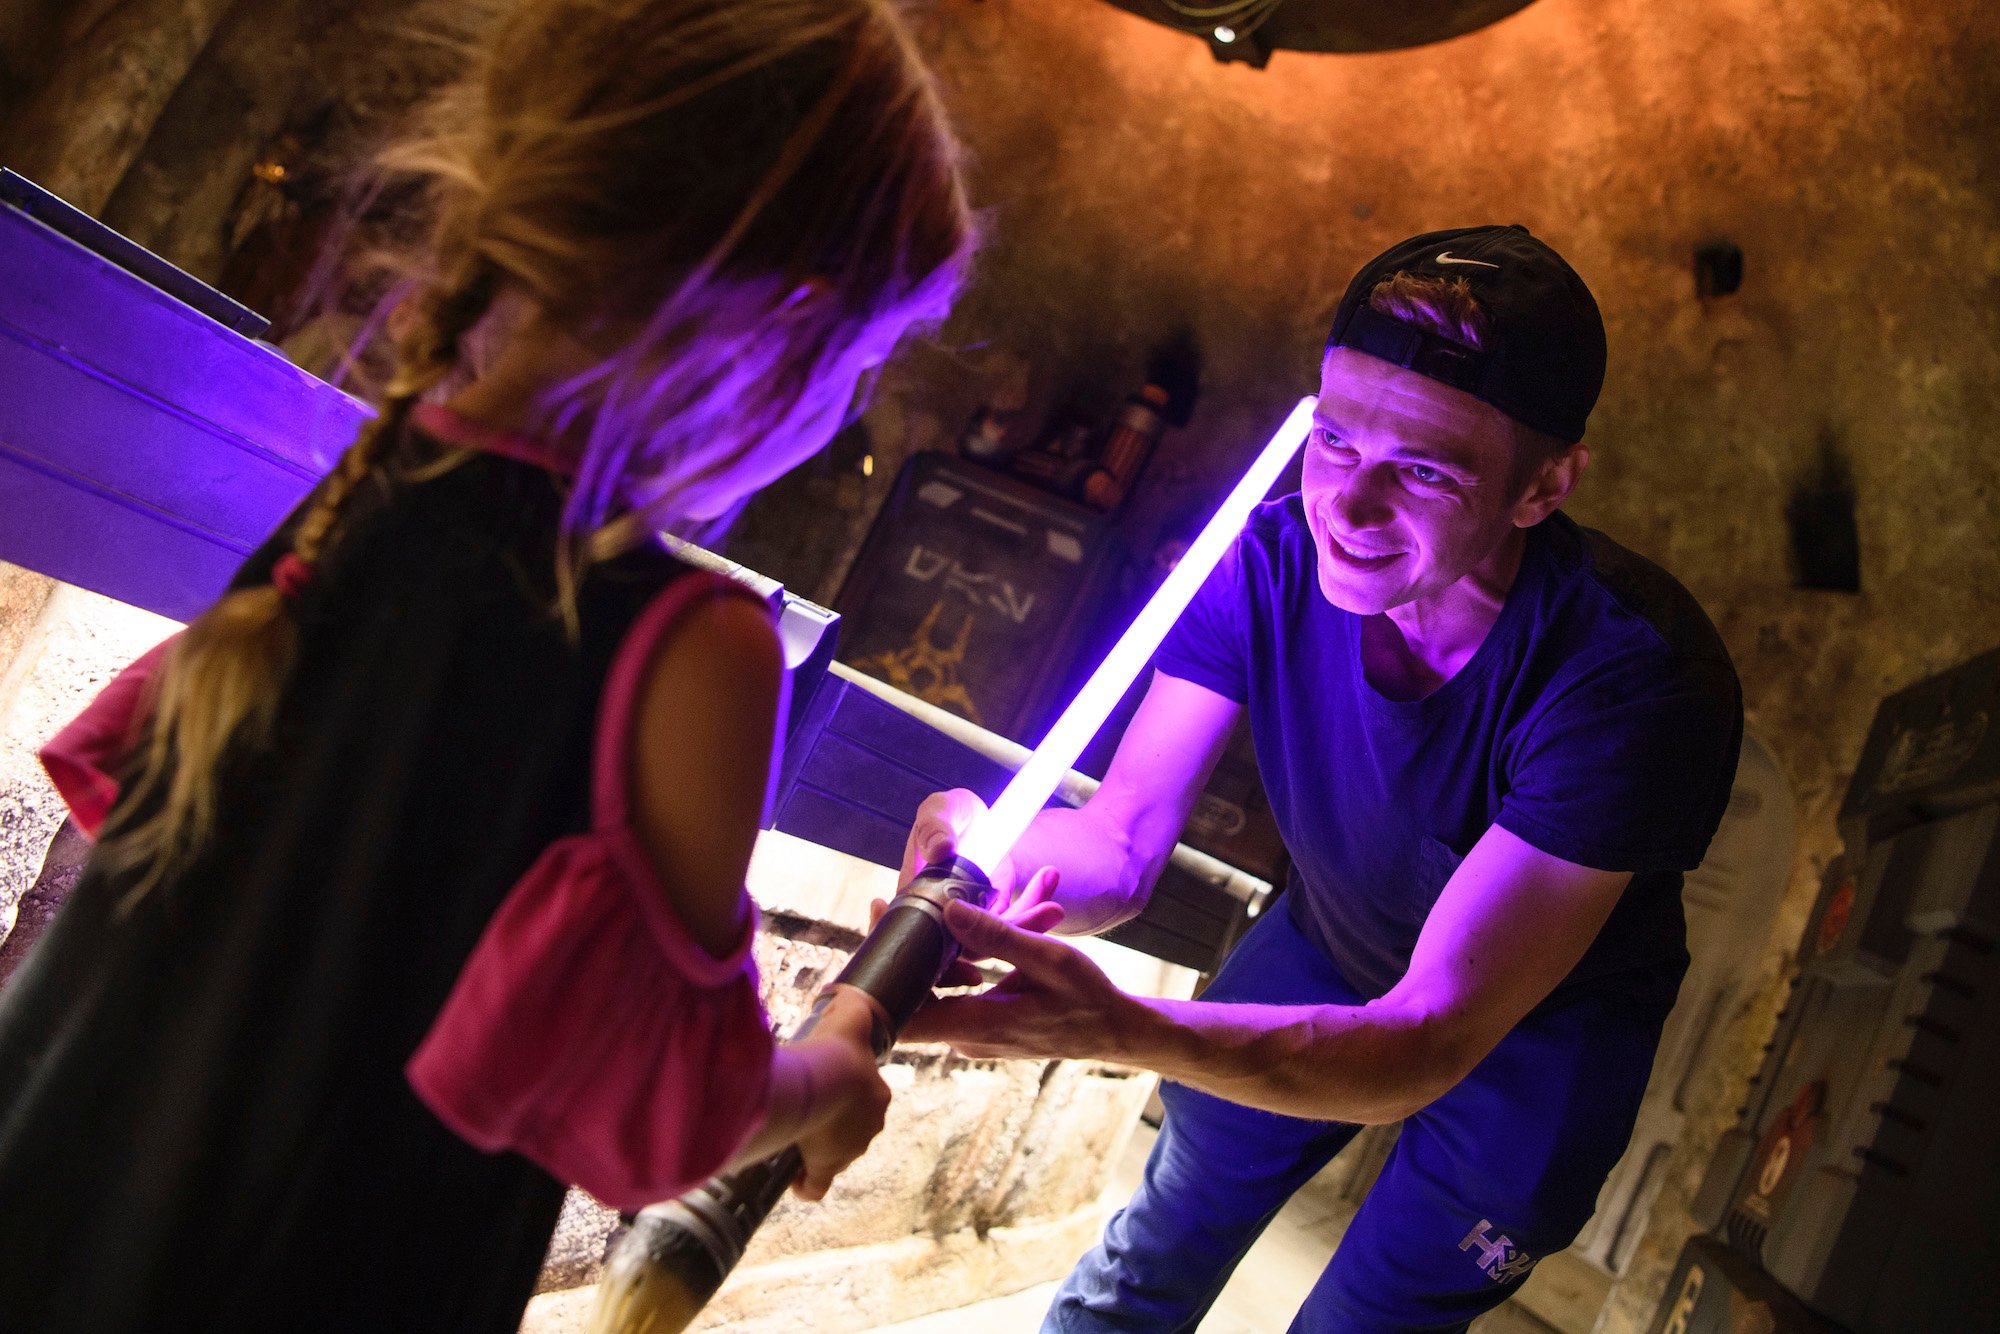 Hayden Christensen shares a moment with his daughter, on her birthday, after building a custom lightsaber in Savi's Workshop at Star Wars: Galaxy's Edge at Disneyland Park on Oct. 29, 2019